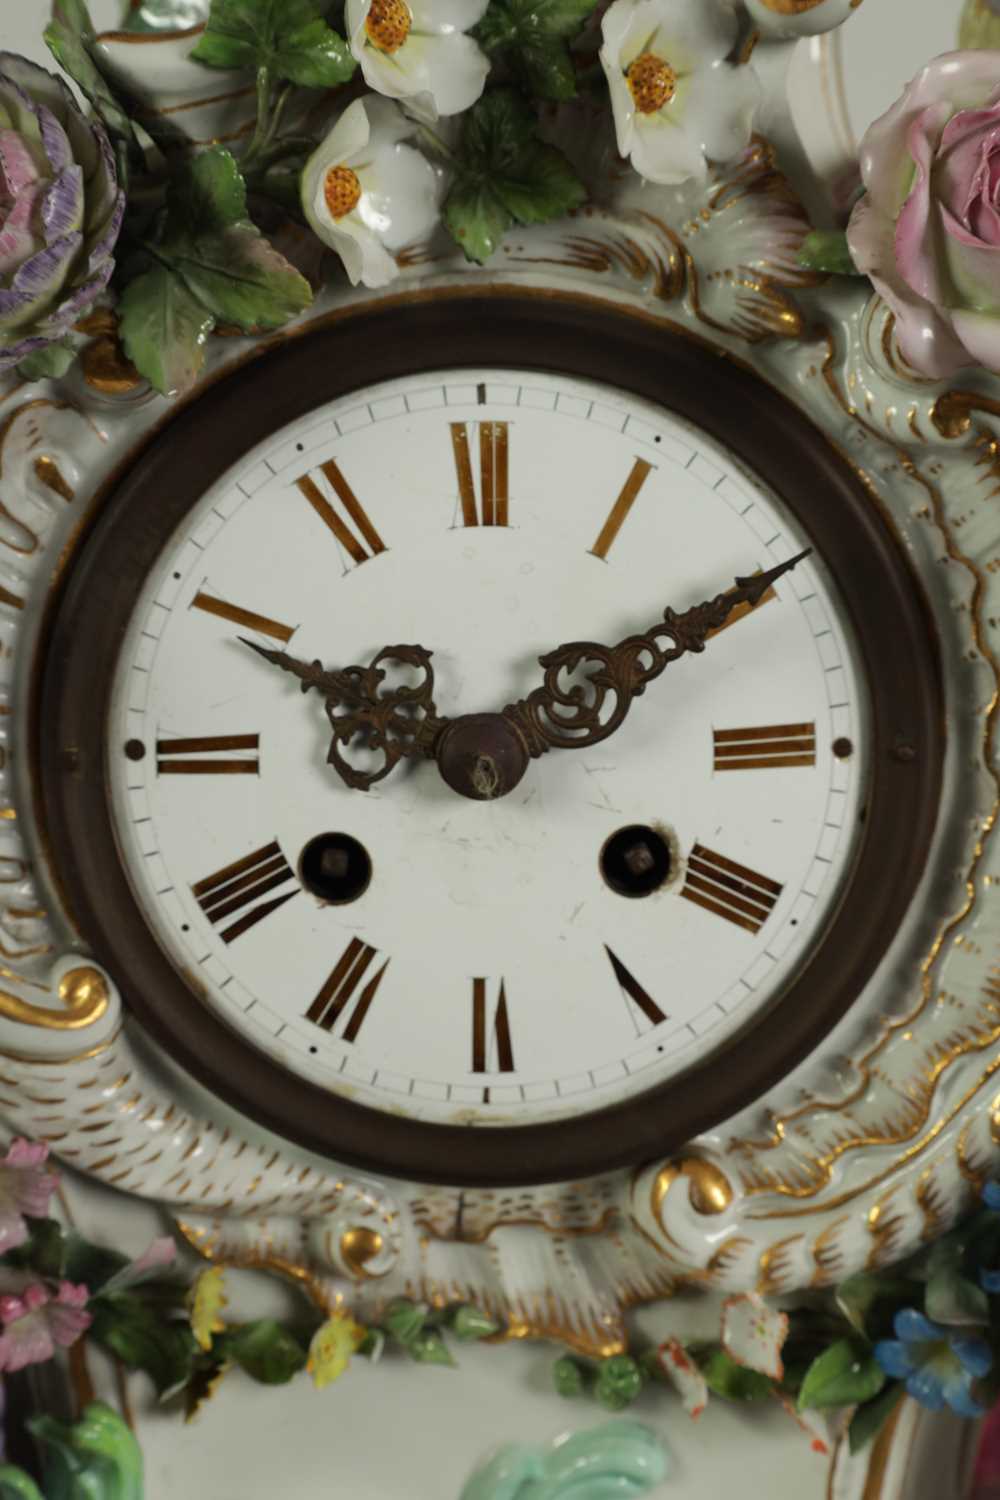 AN IMPRESSIVE MID/LATE 19TH CENTURY MEISSEN MANTEL CLOCK OF LARGE SIZE - Image 3 of 22